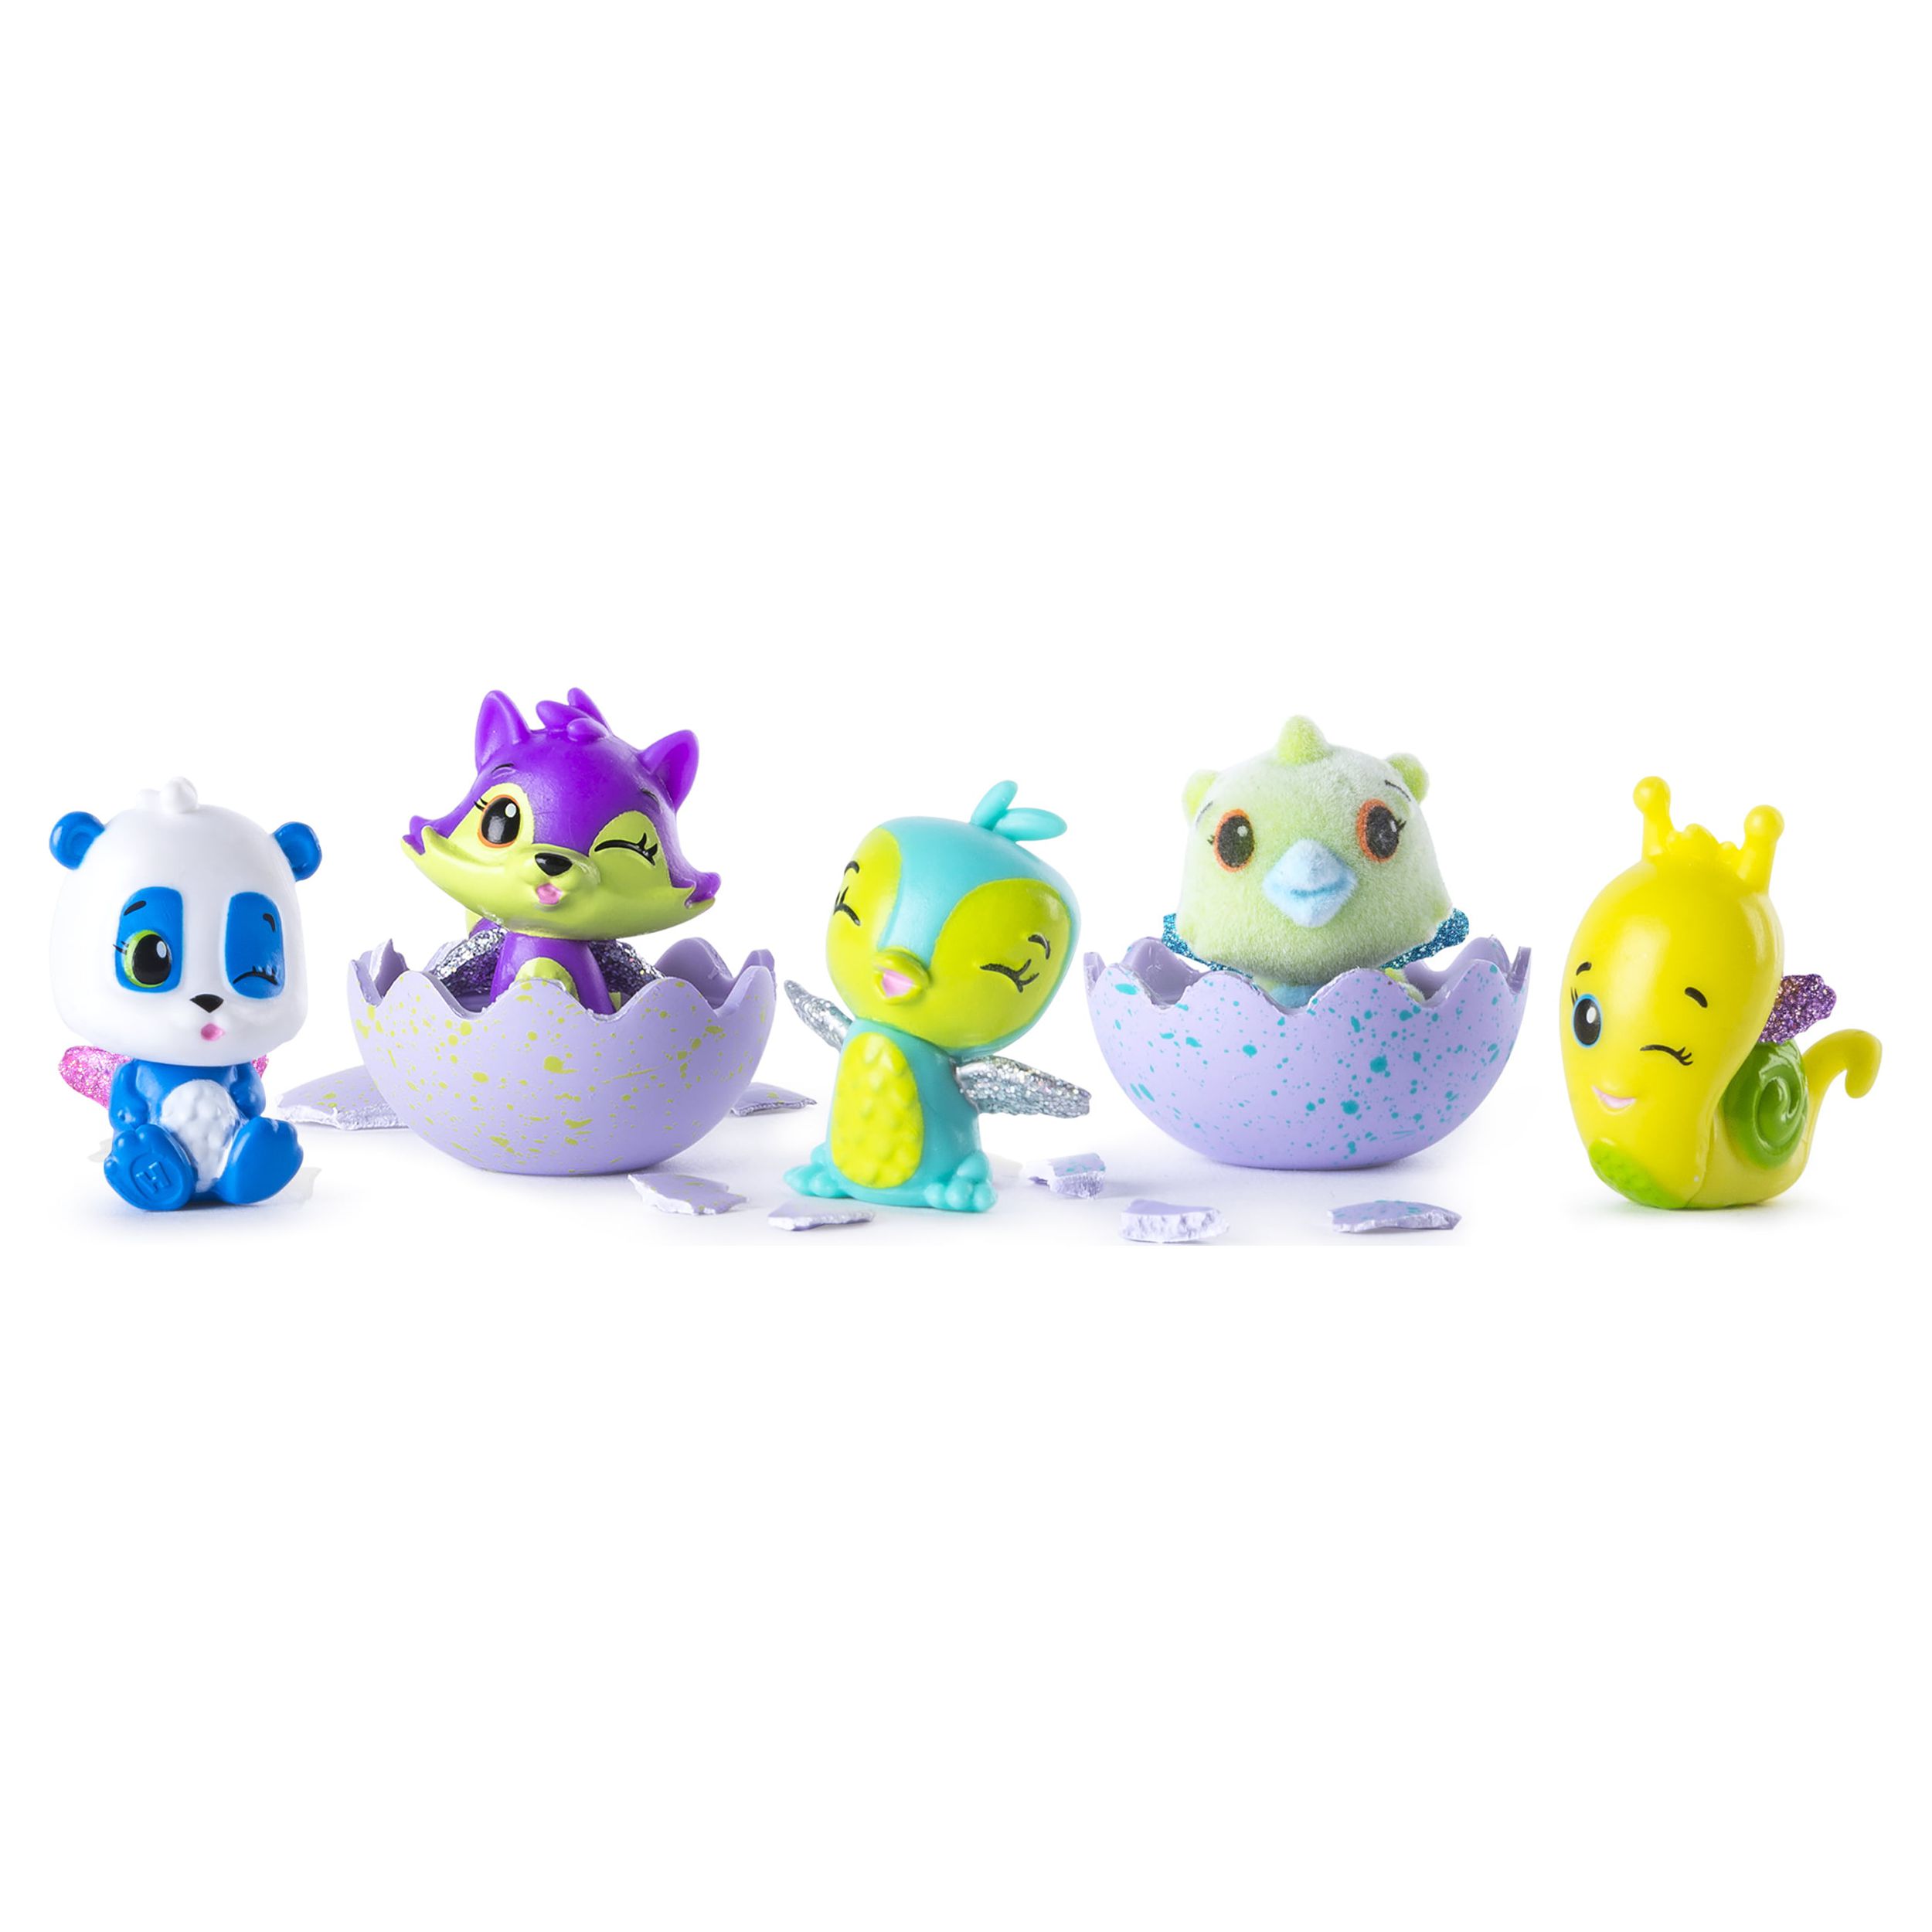 Hatchimals, CollEGGtibles, 4 Pack + Bonus (Styles & Colors May Vary) by Spin Master - Electronic Pets - image 8 of 14